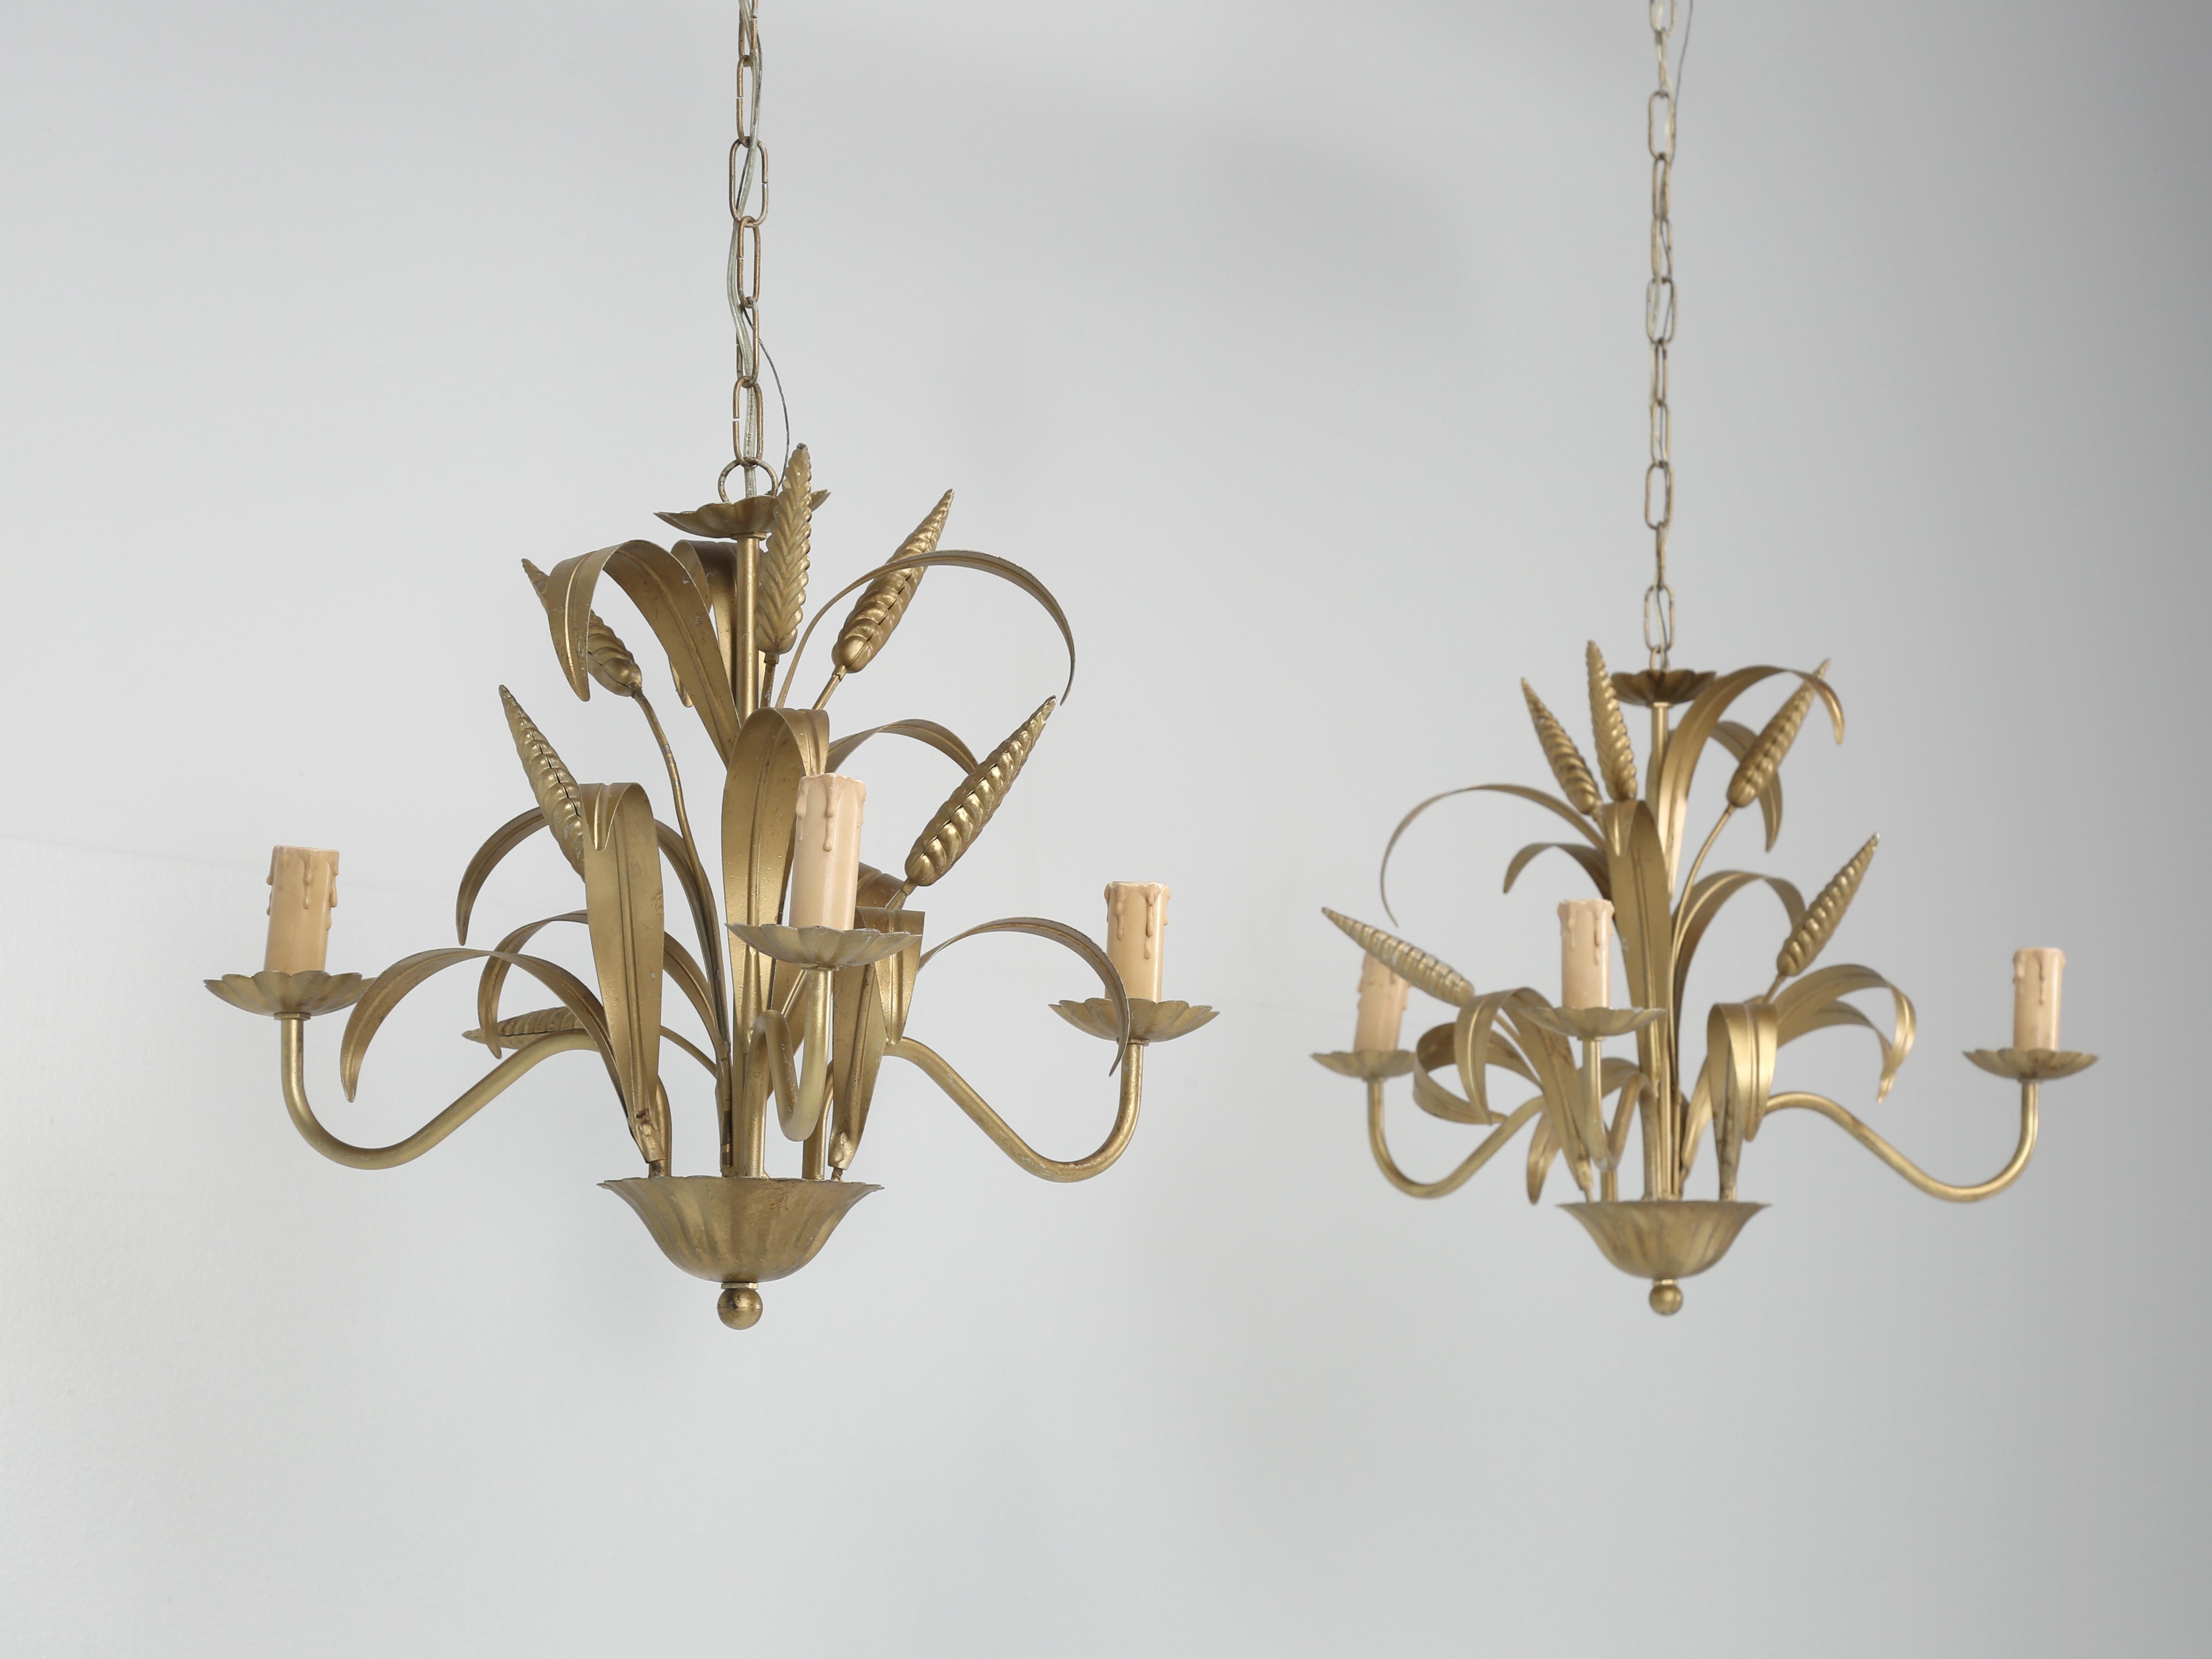 Pair of Hollywood Regency “ Coco Chanel “ style, sheaf of wheat, 4-light gold gilt metal chandeliers made in Italy, circa 1960s. We have a total of four matching gold gilded metal 4-light metal chandeliers in stock and all were removed from the same